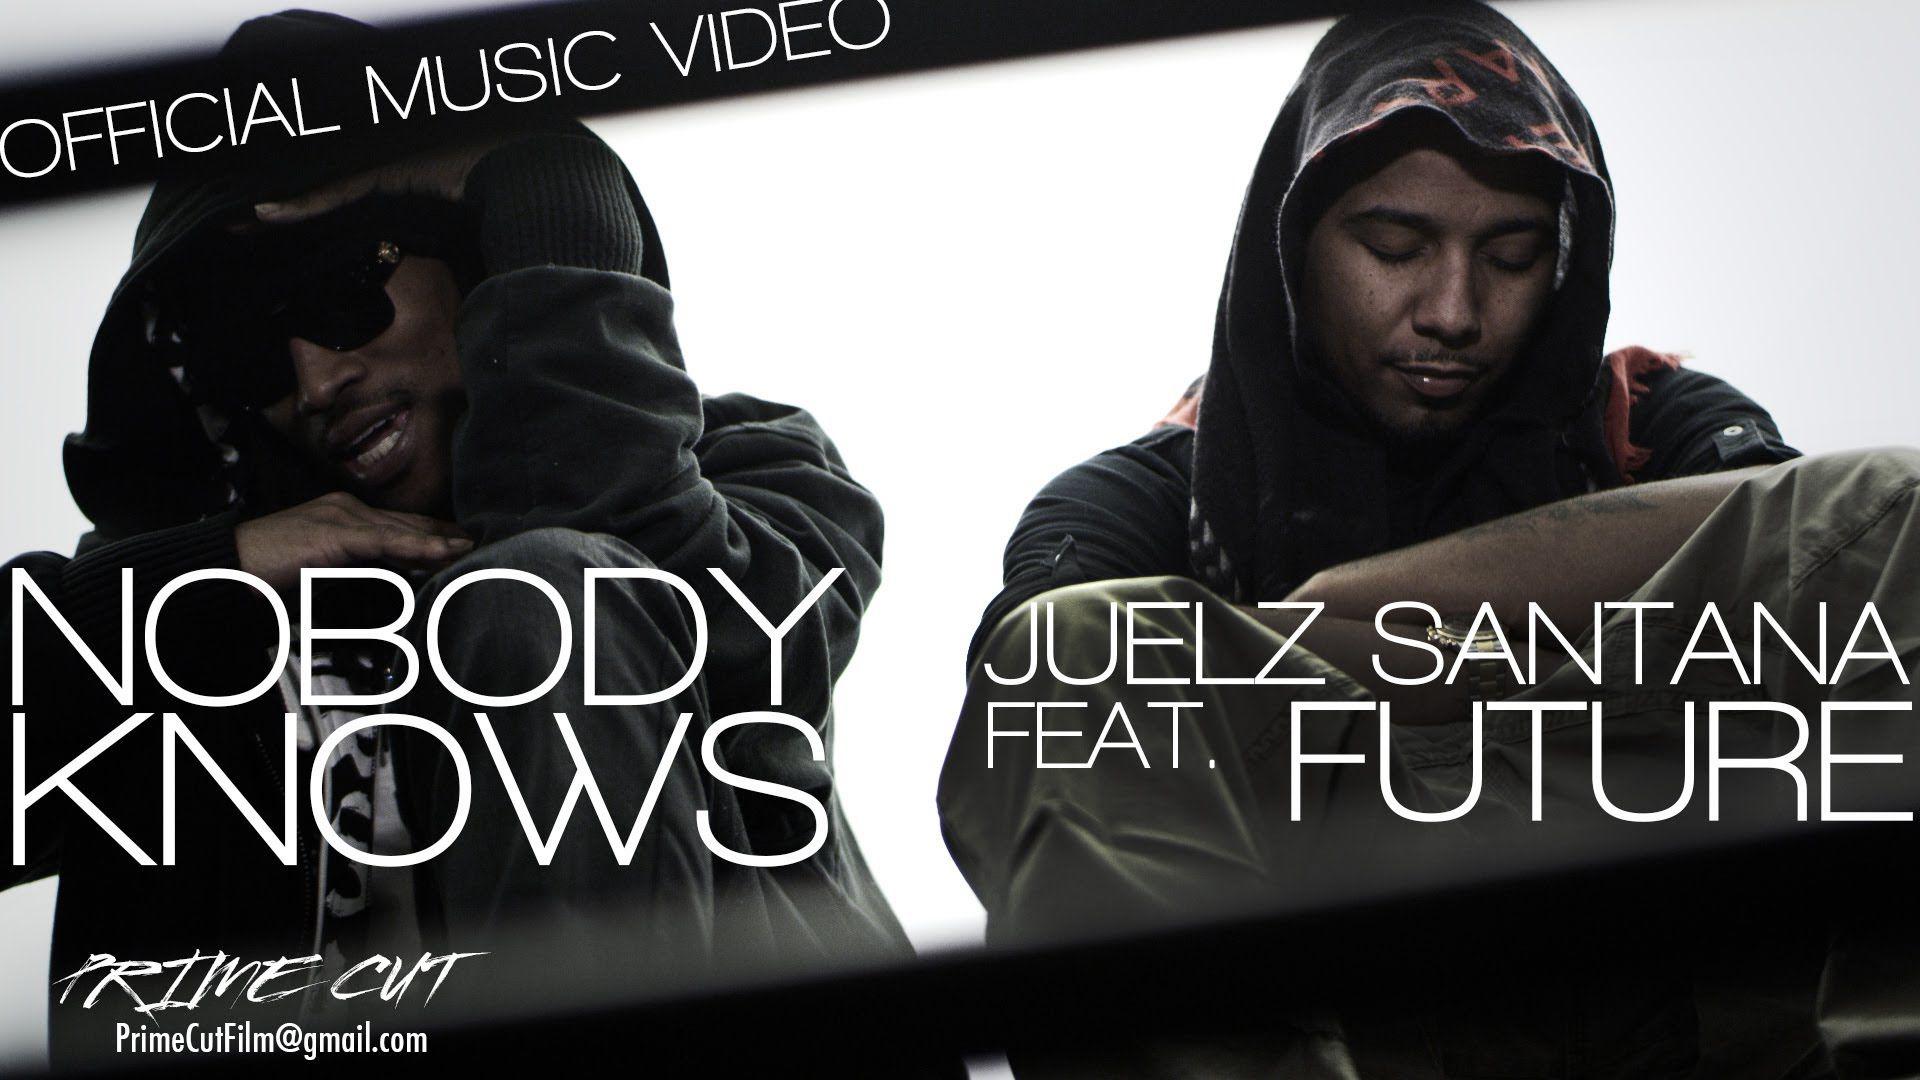 Juelz Santana Knows (feat. Future) Official Music Video